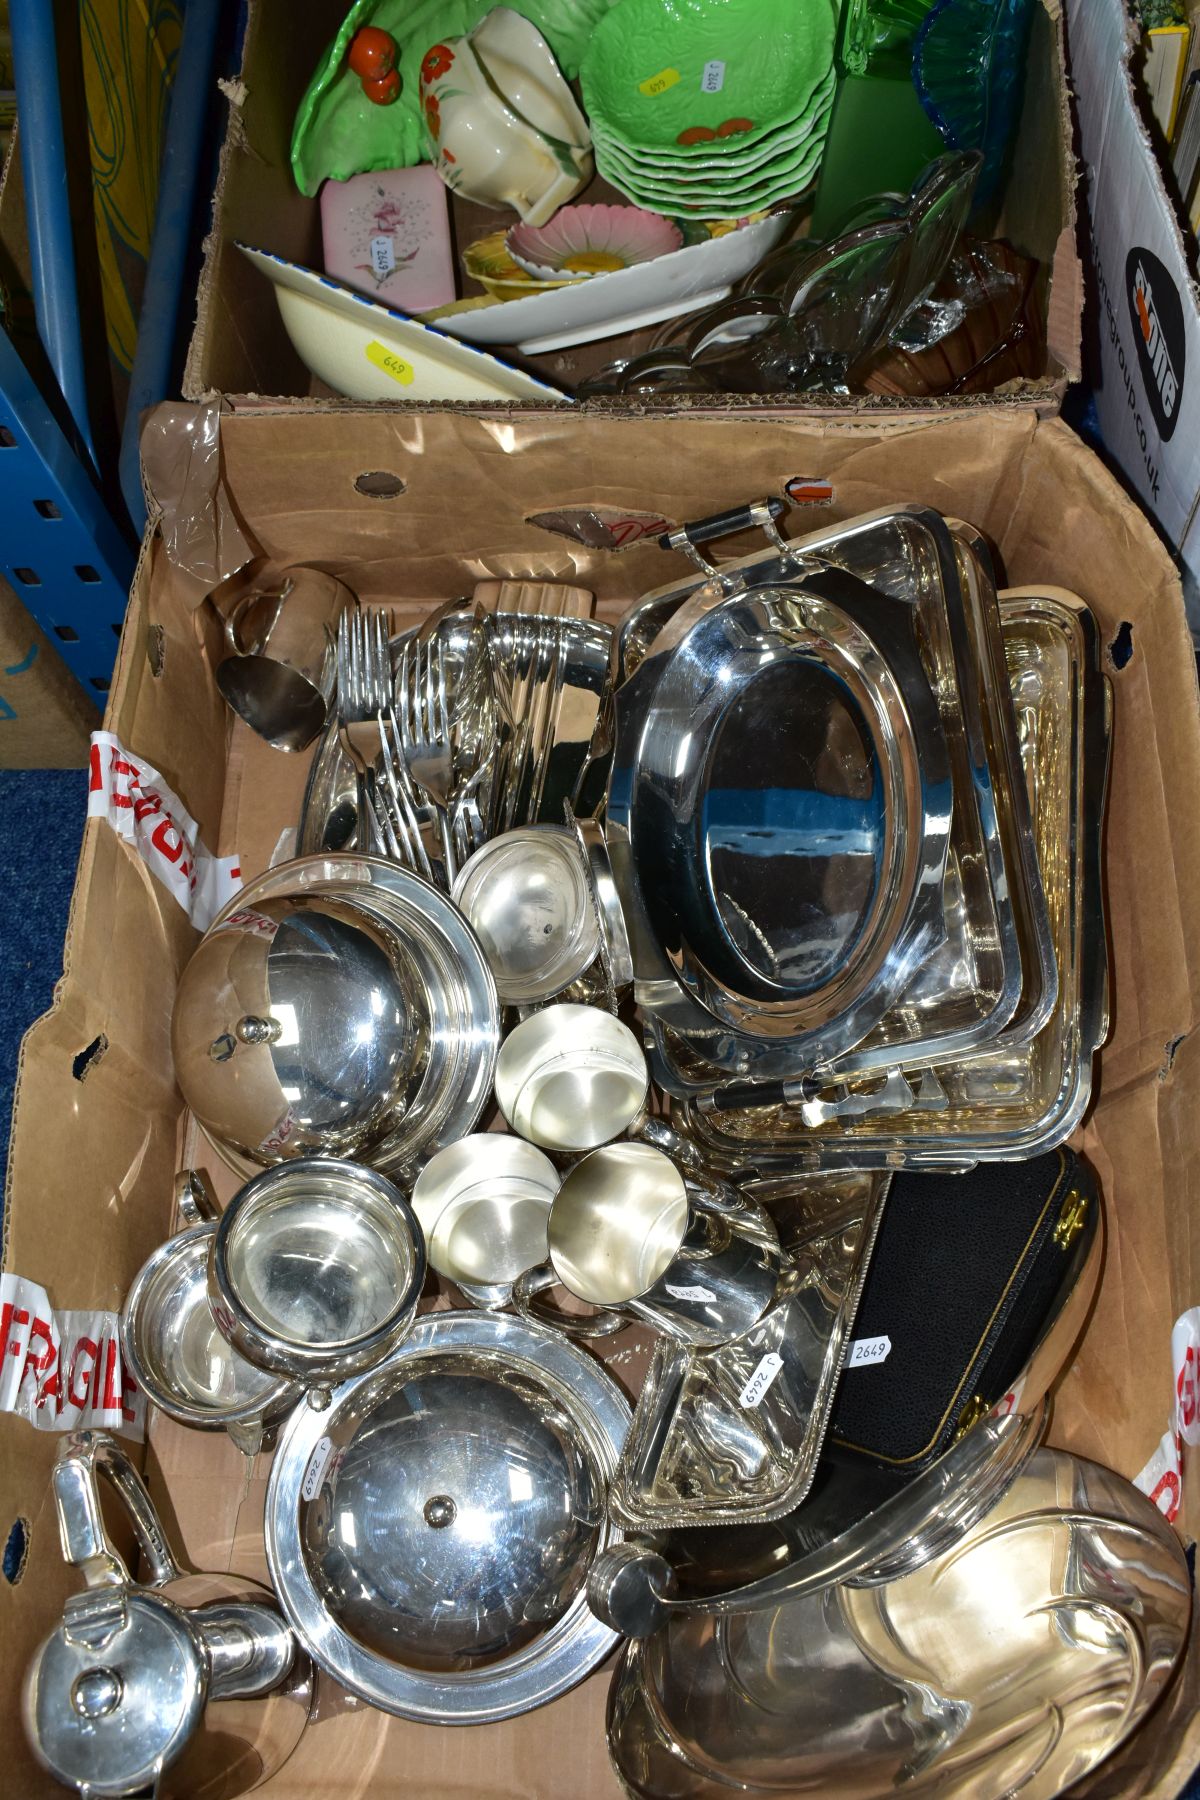 TWO BOXES OF SILVER PLATE, CARLTON WARE DISHES, COLOURED PRESSED GLASS DISHES, etc, including a